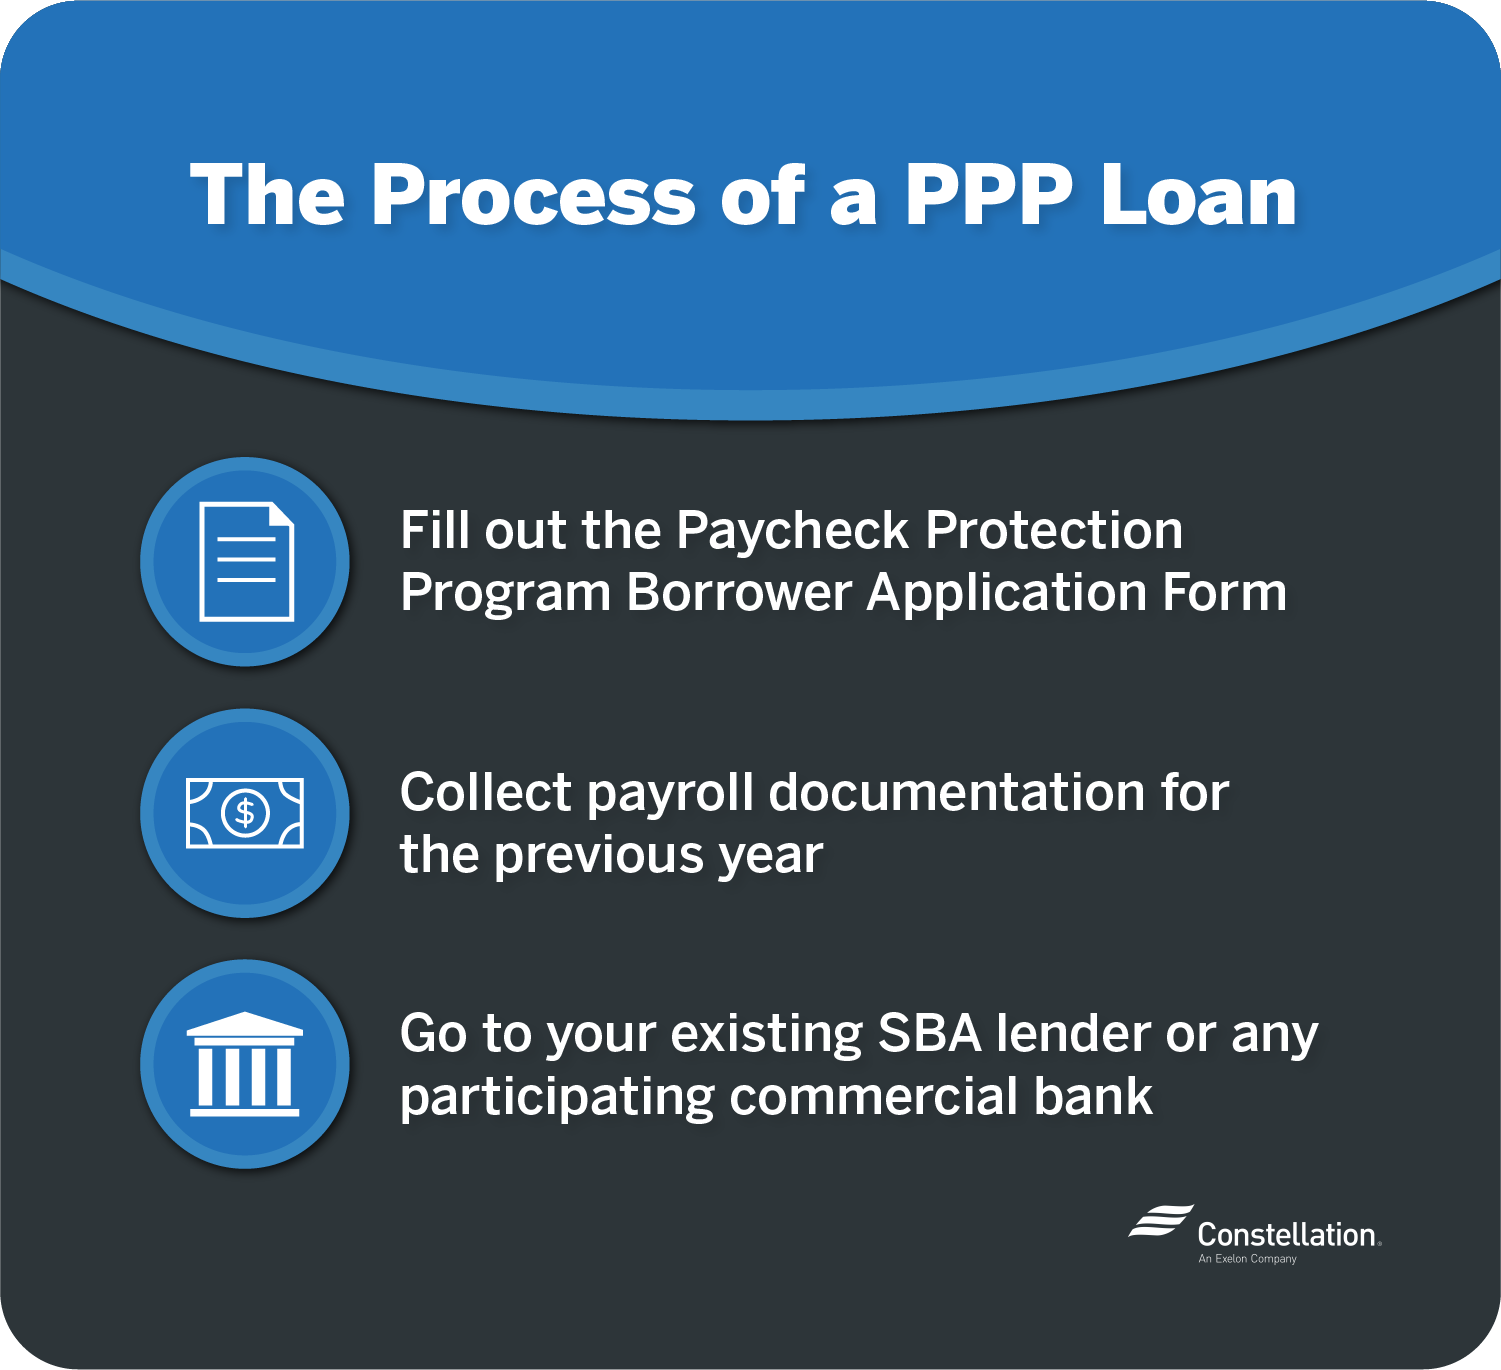 Process of a PPP loan